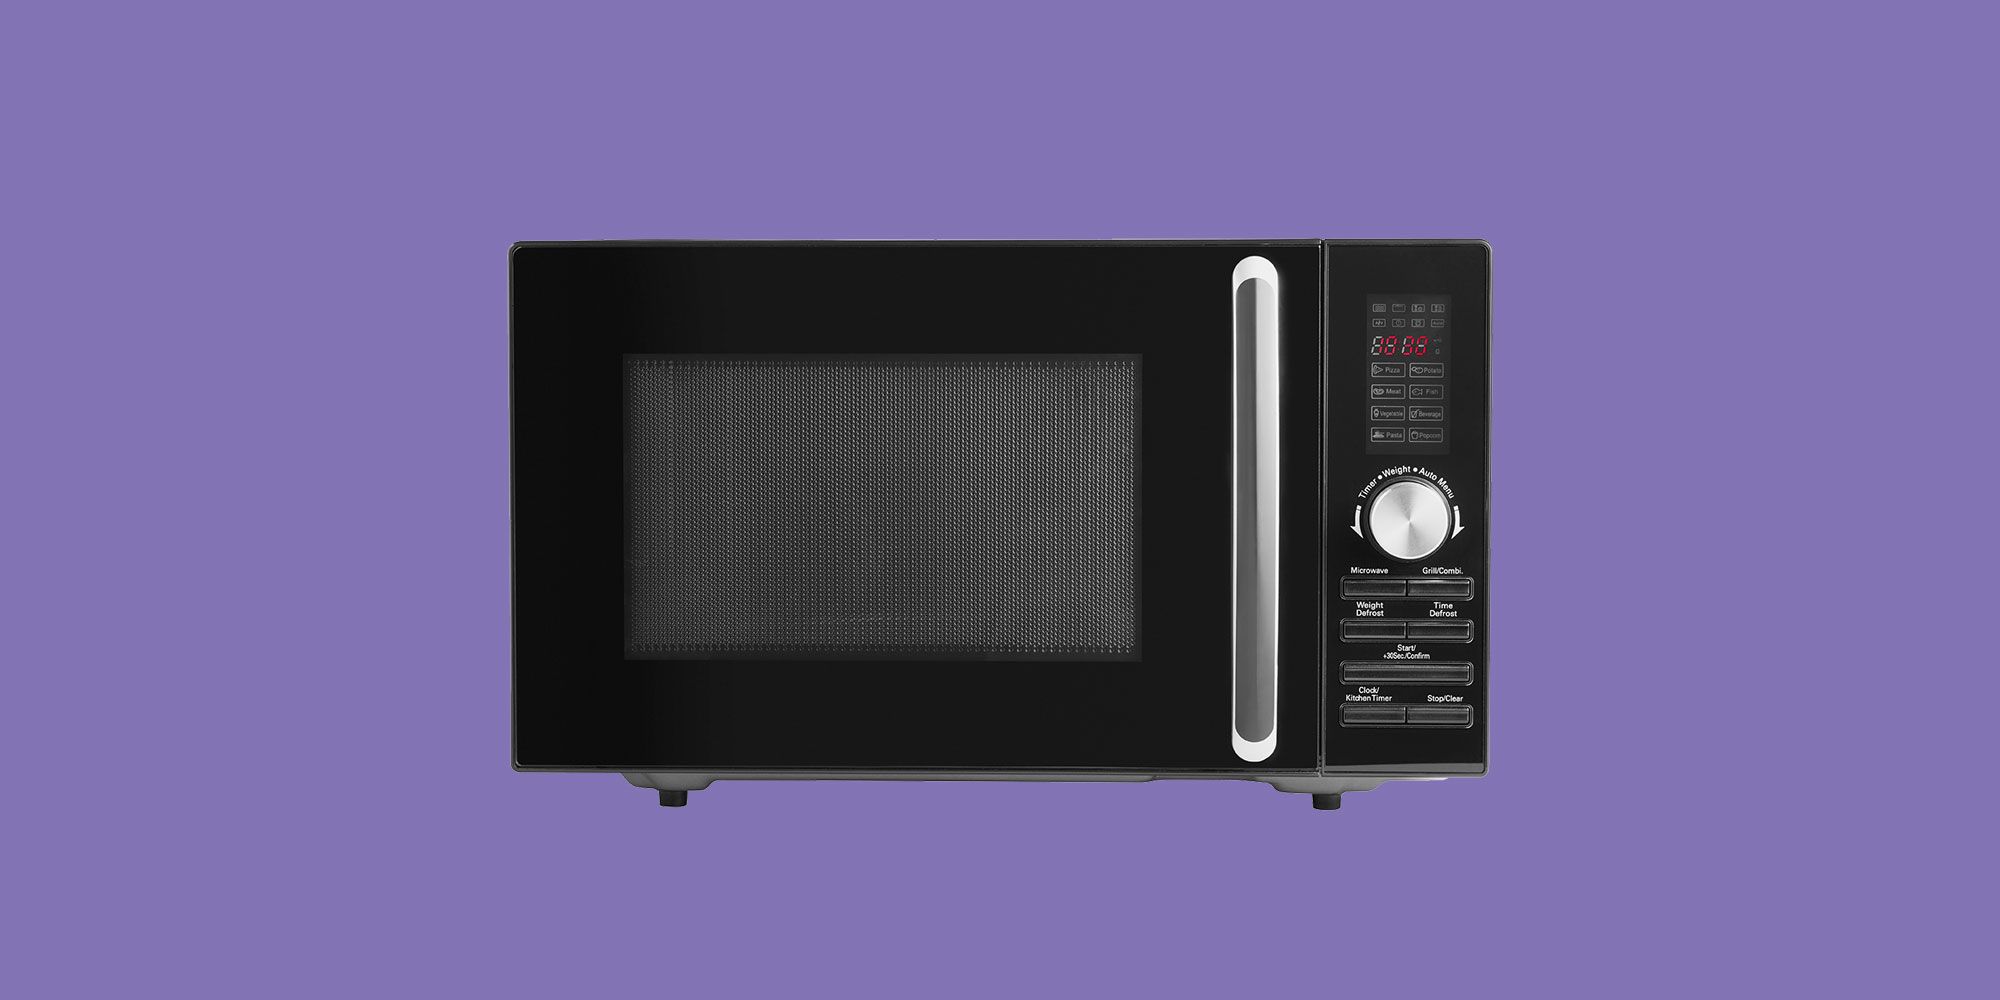 Beko Convection Microwave with Grill MCF28310X Review